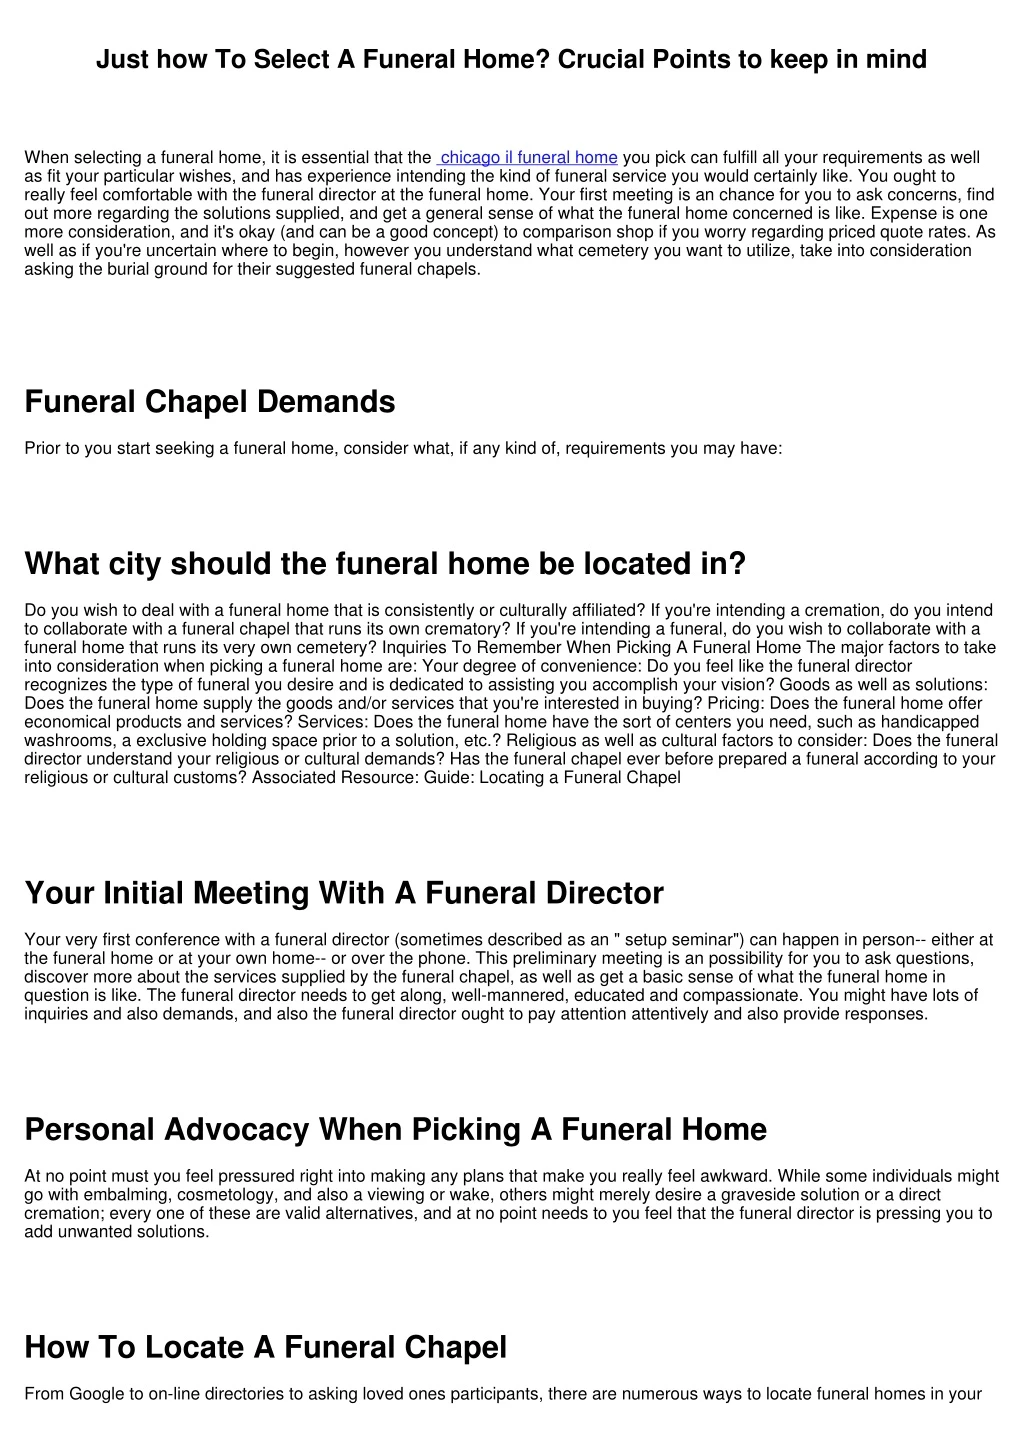 just how to select a funeral home crucial points